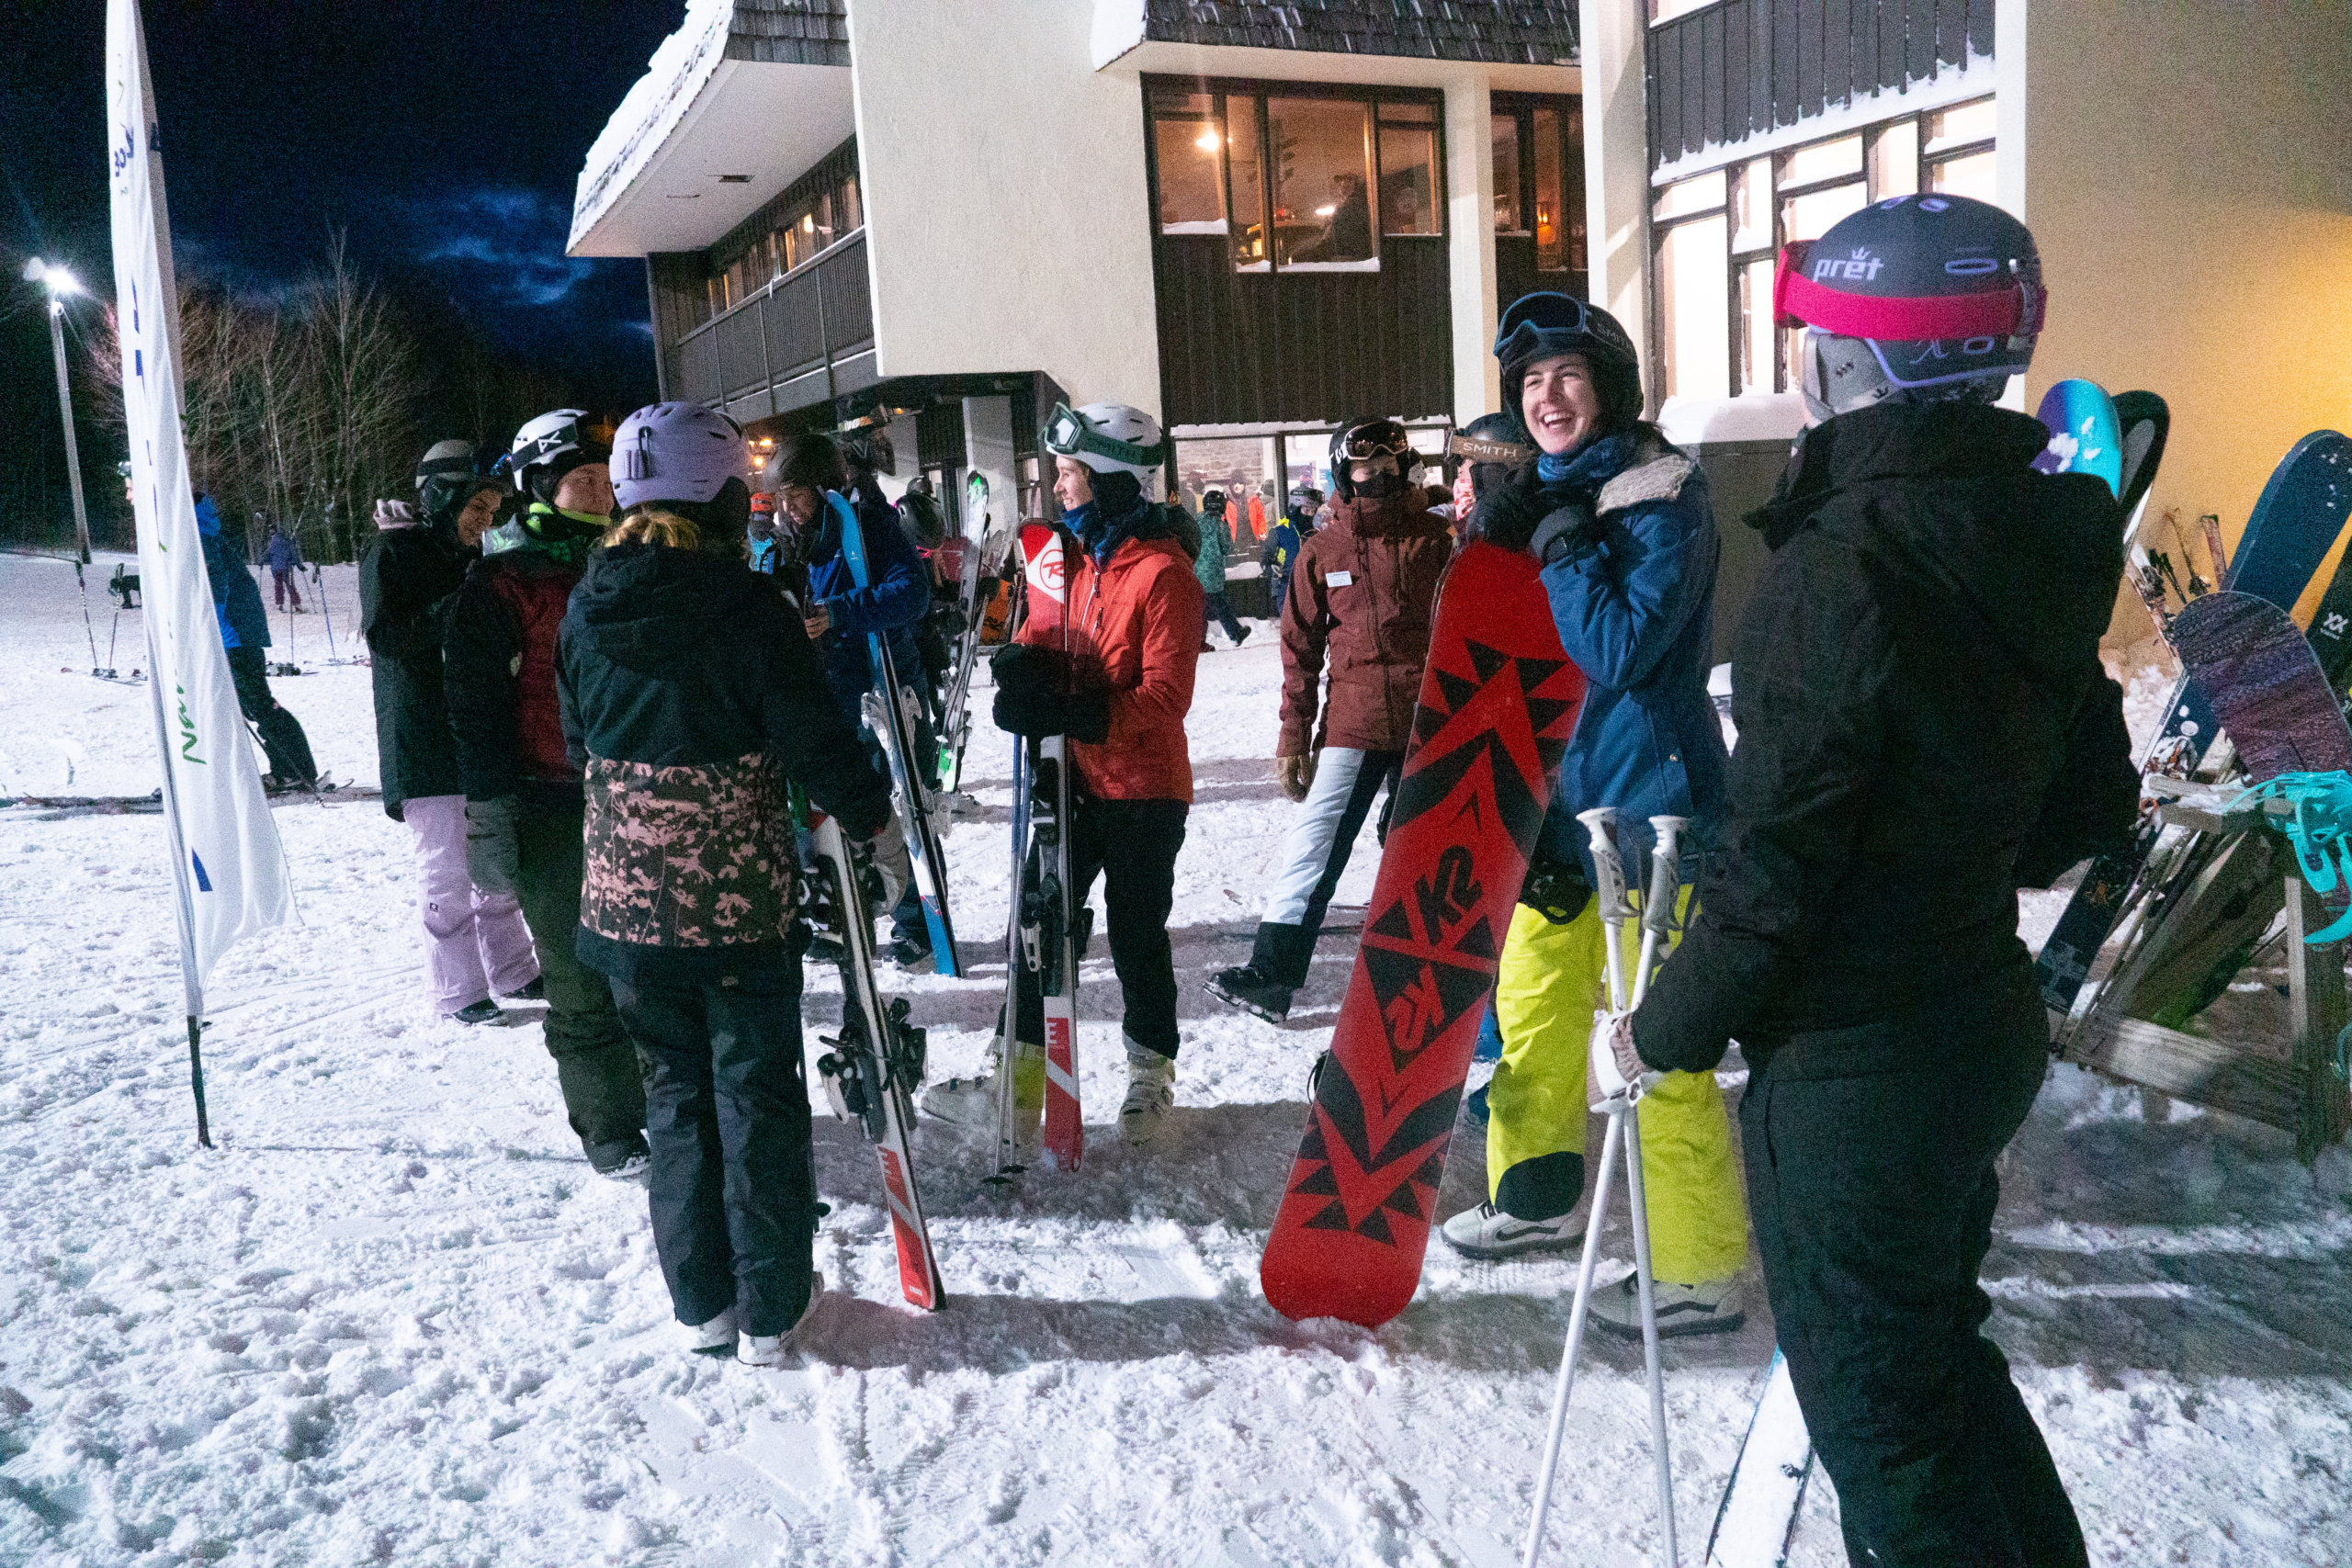 Group of women skiiers and snowboarders with their gear on snow chatting and laughing.